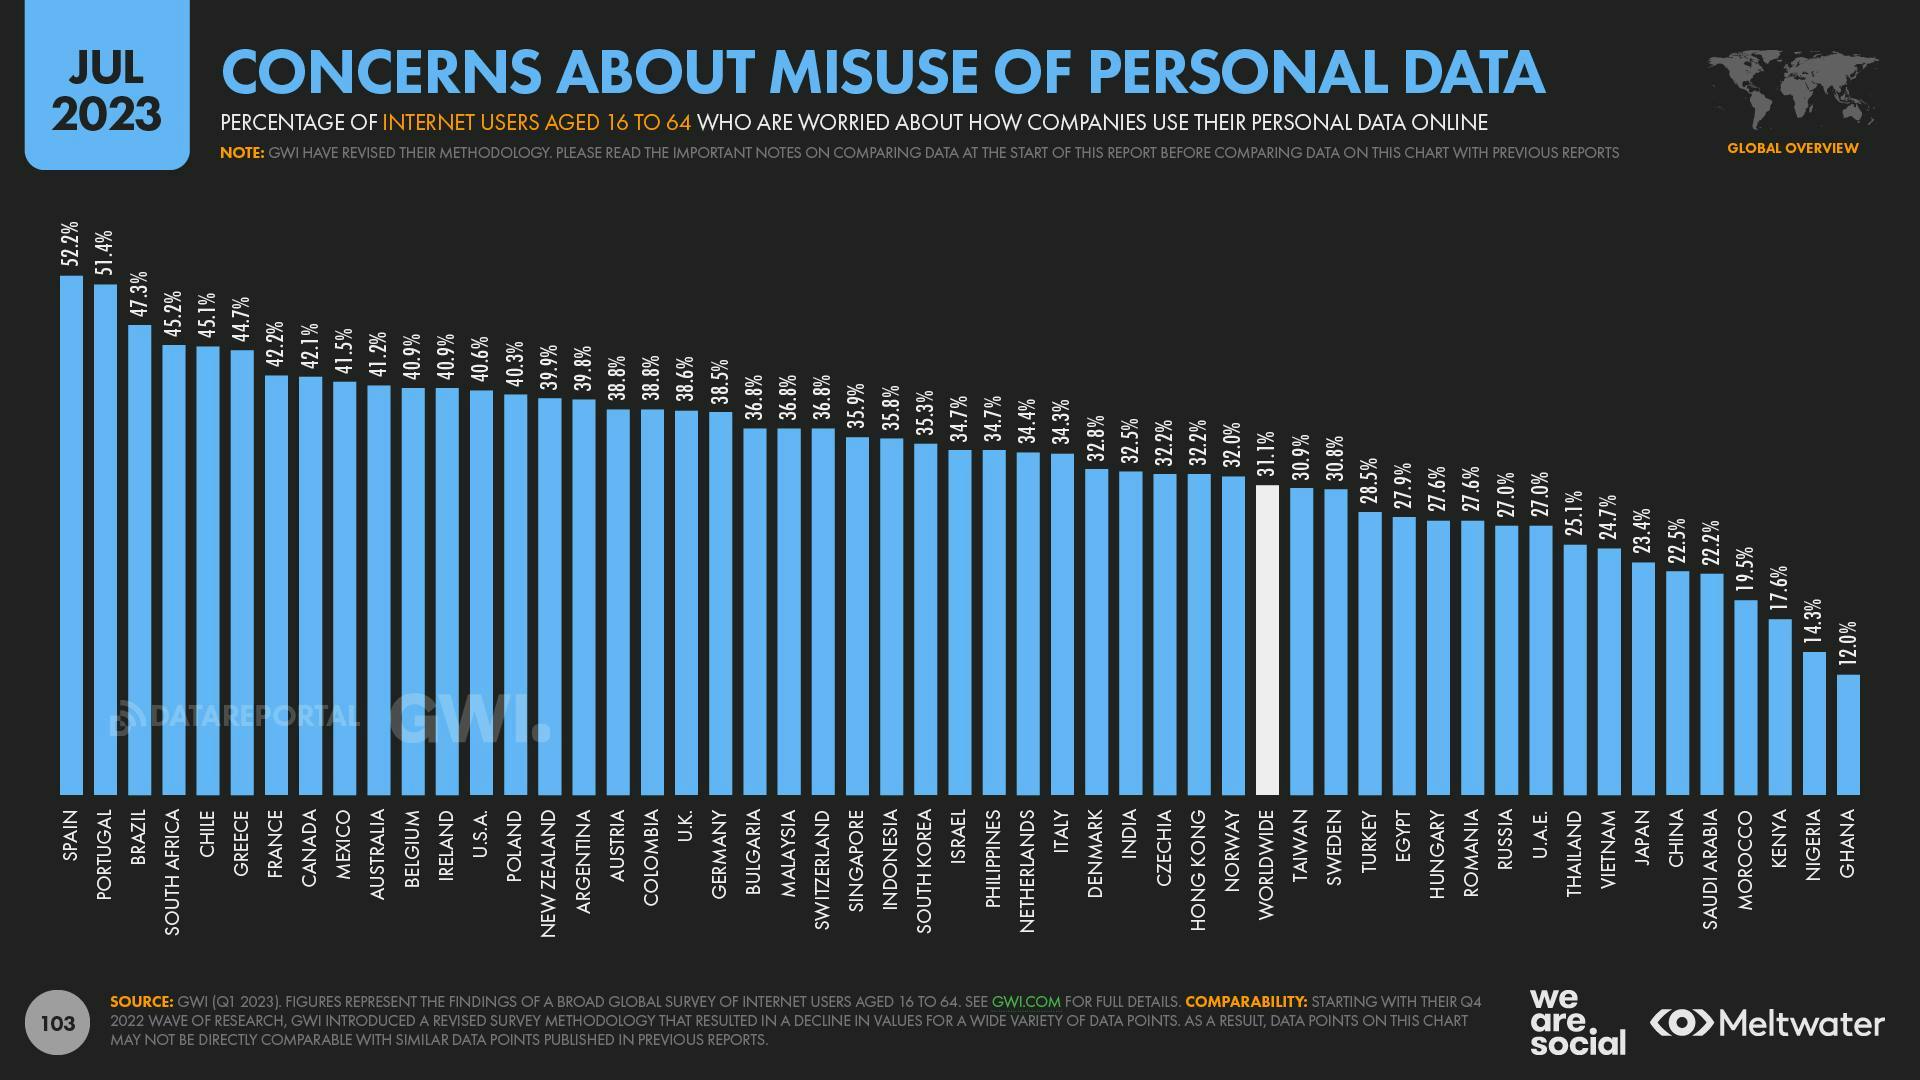 Concerns about misuse of personal data by country